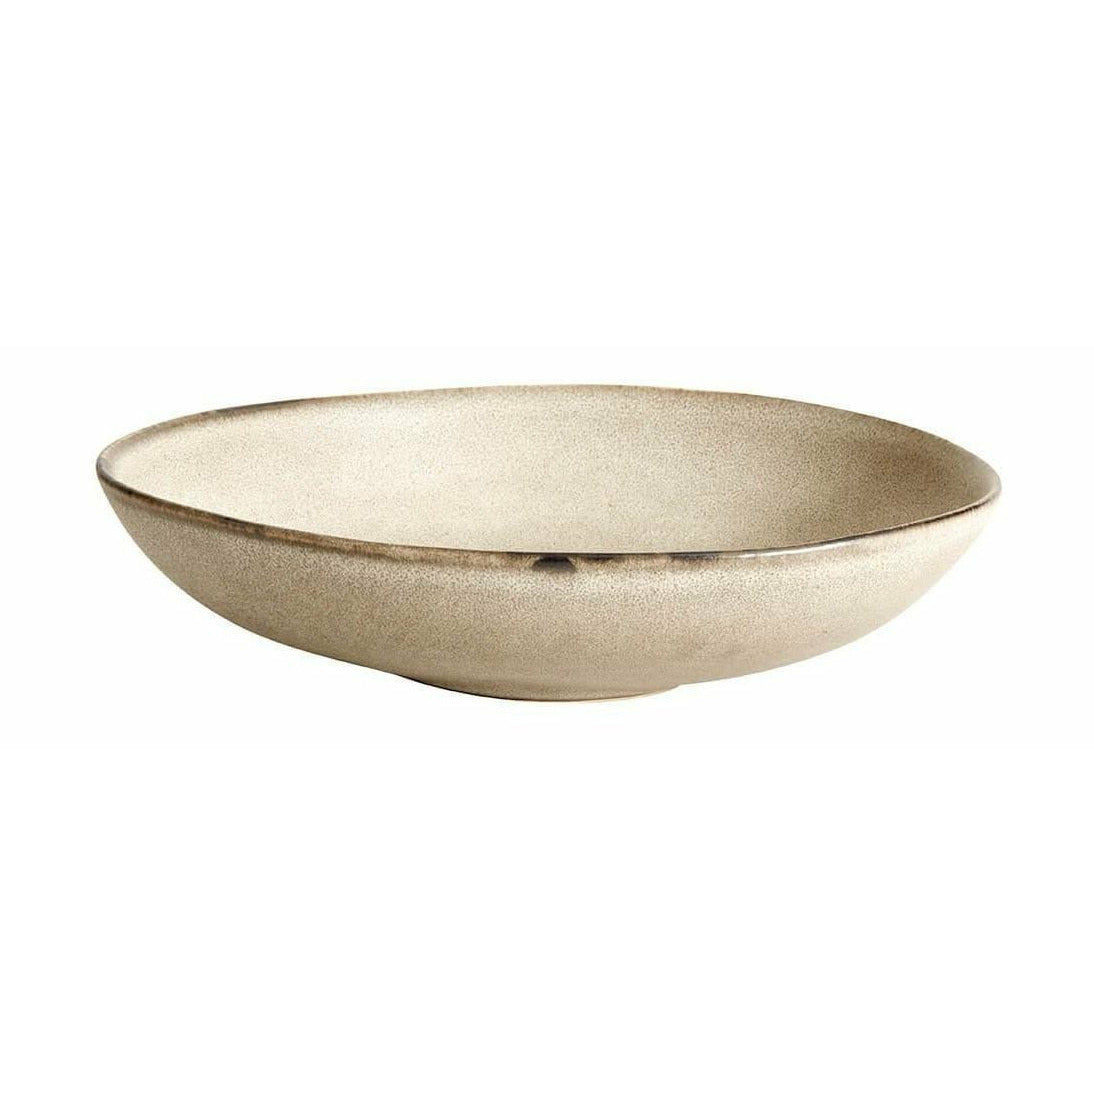 Mame Mame Serviing Bowl Oyster, 19 cm